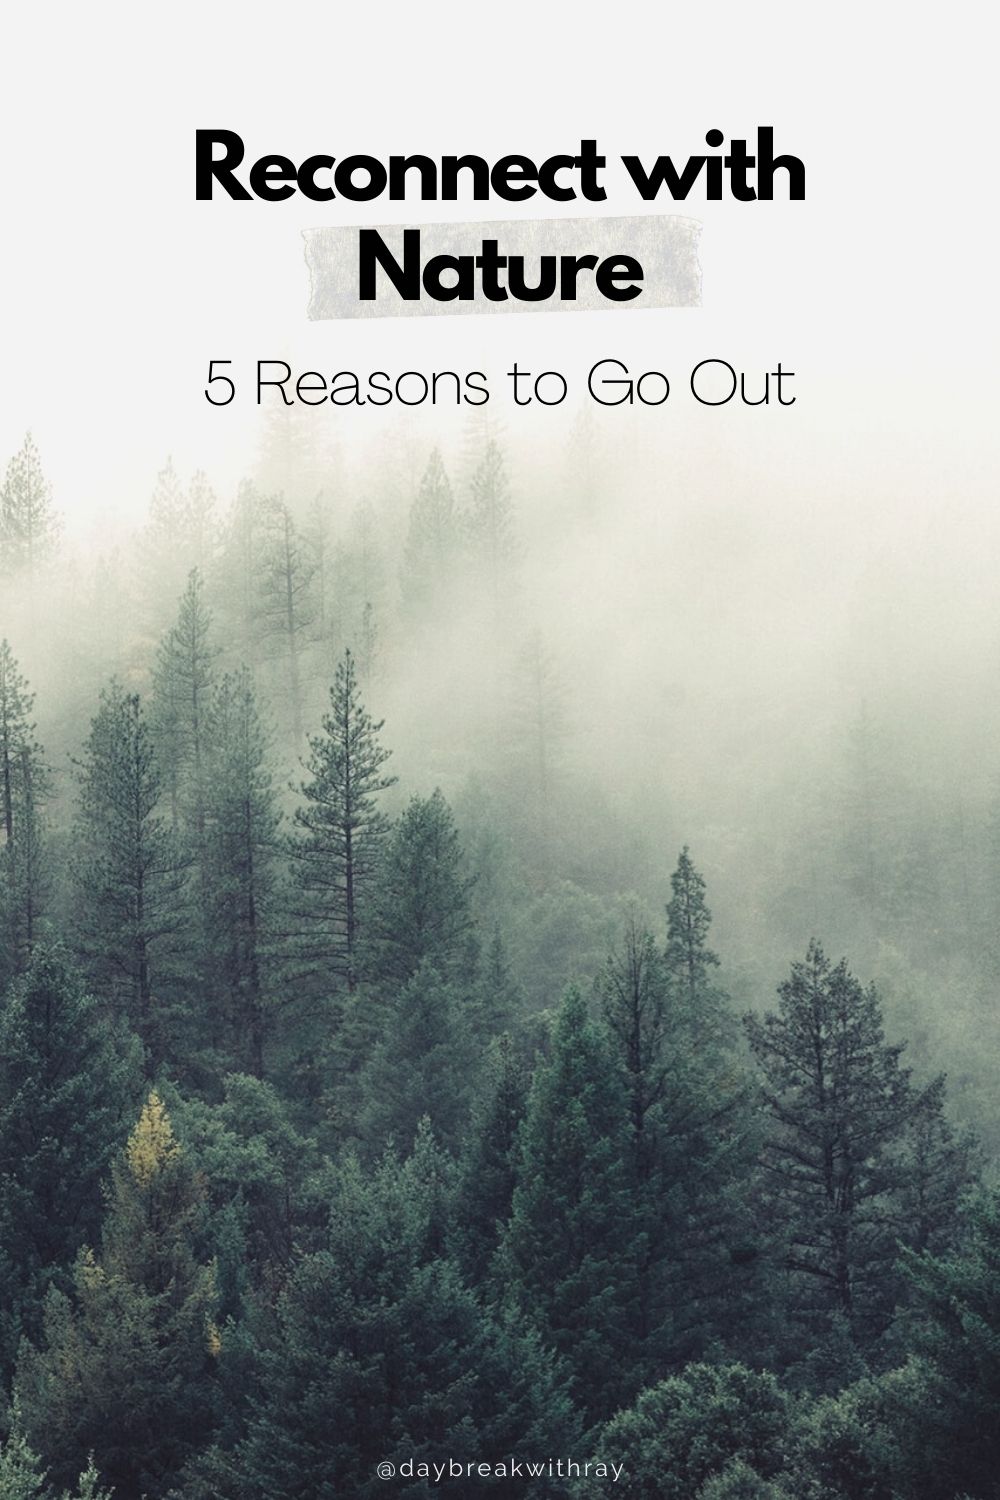 Nature: How connecting with nature benefits our mental health